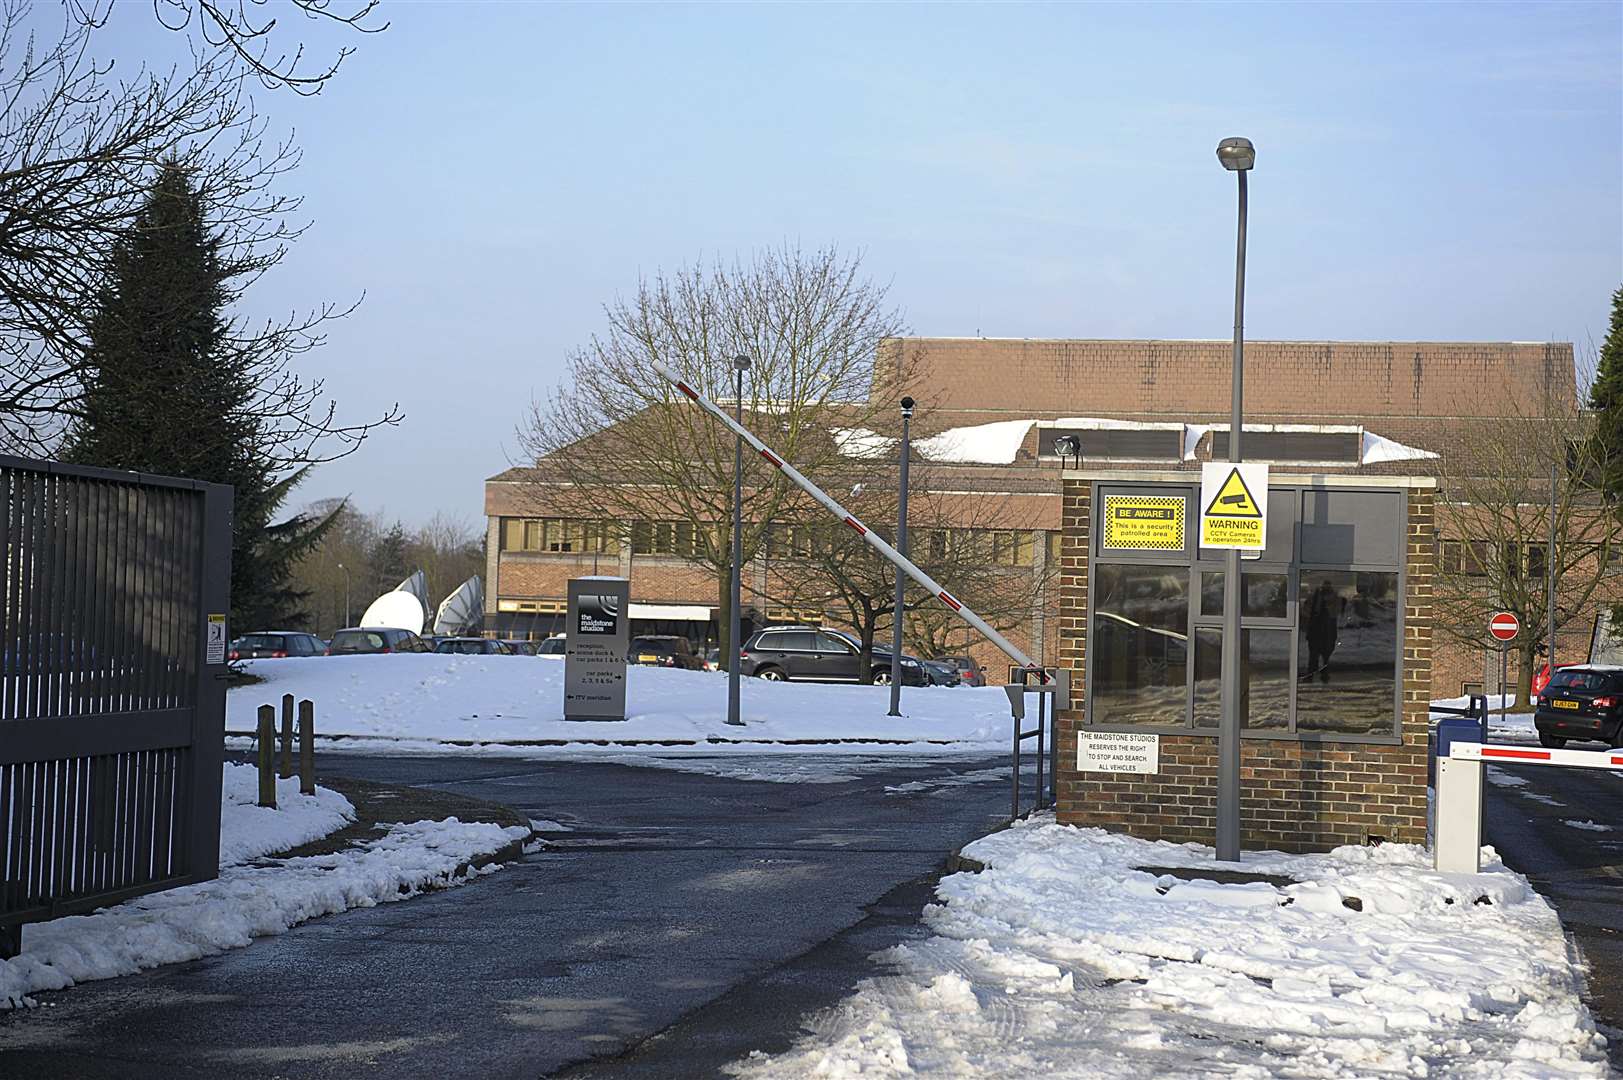 Maidstone Studios has been the filming location of the annual show since 2013